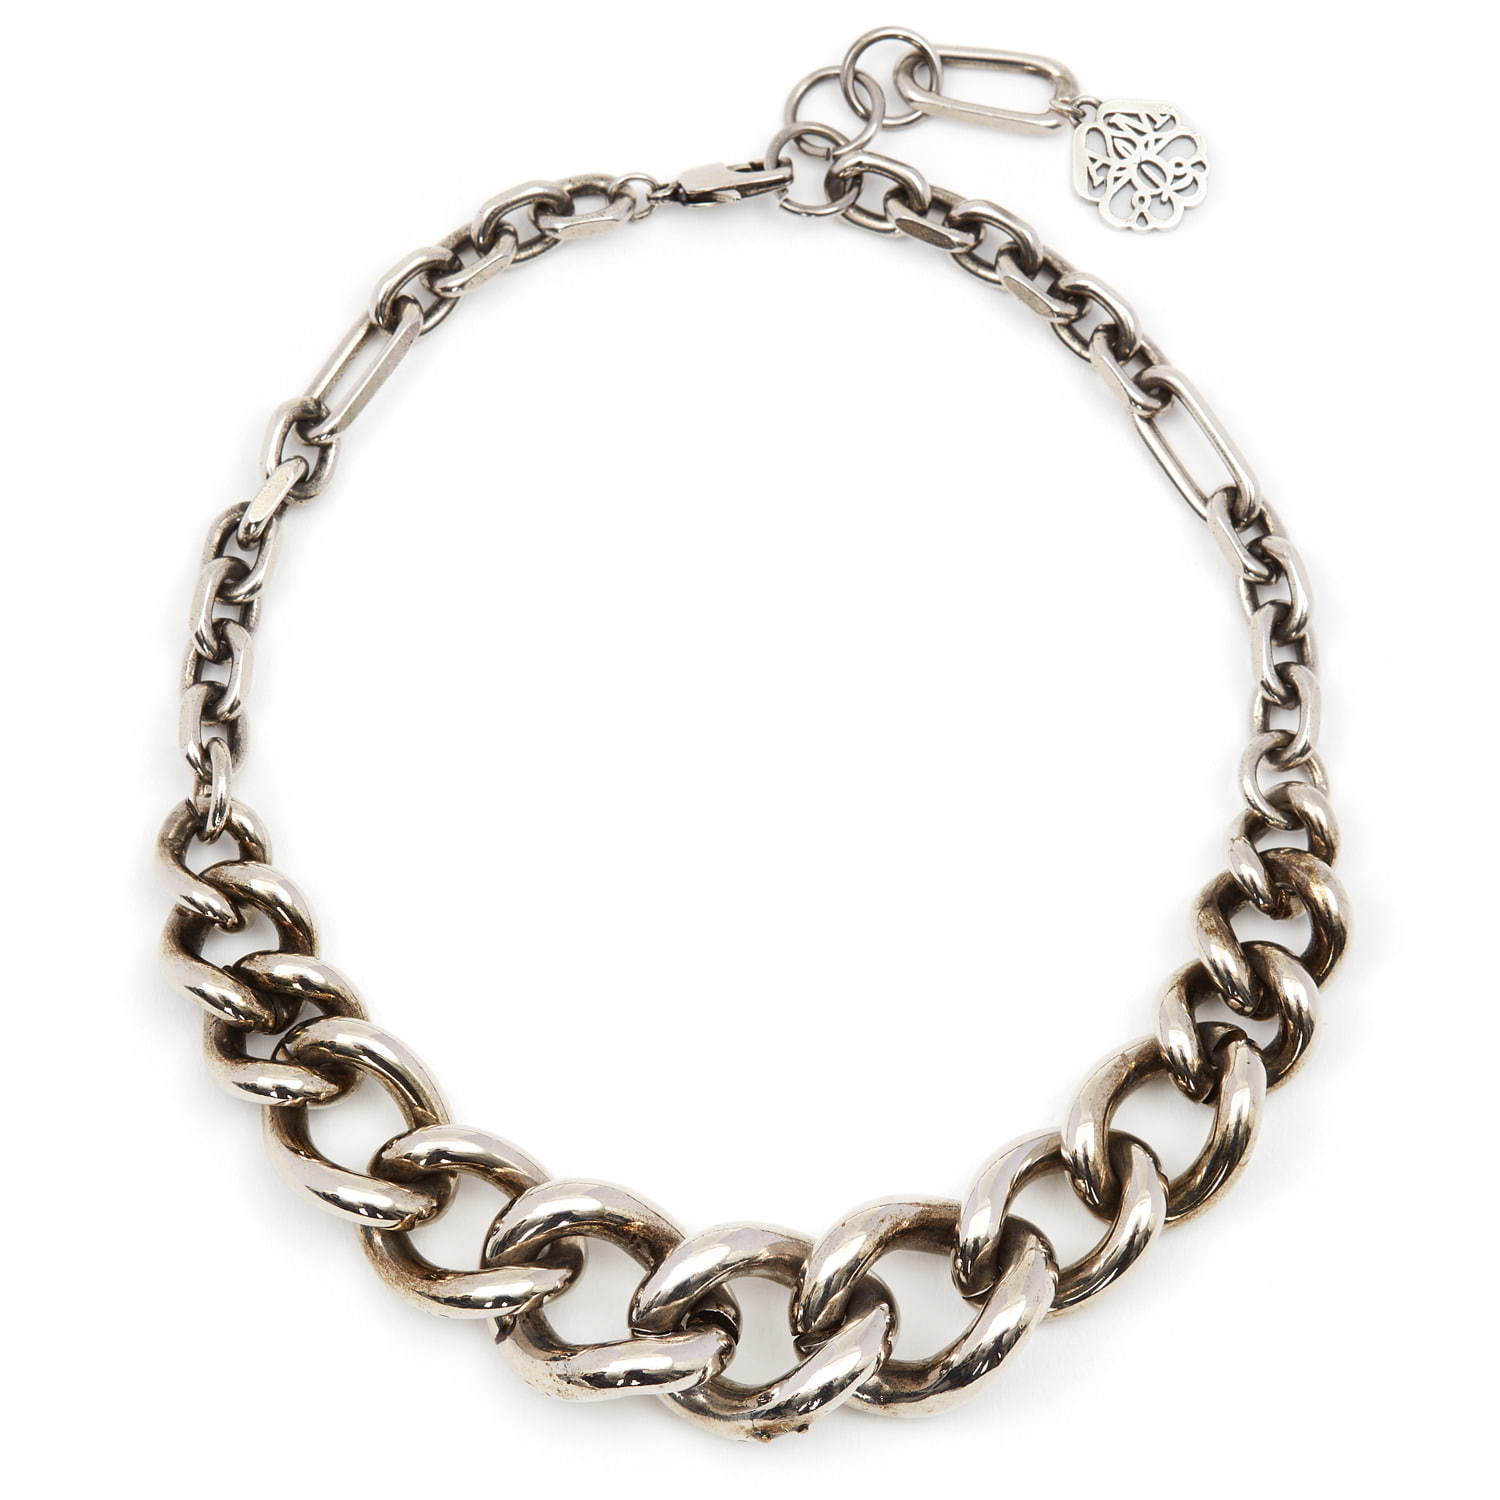 「SHORT CHAIN NECKLACE」95,000円＋税